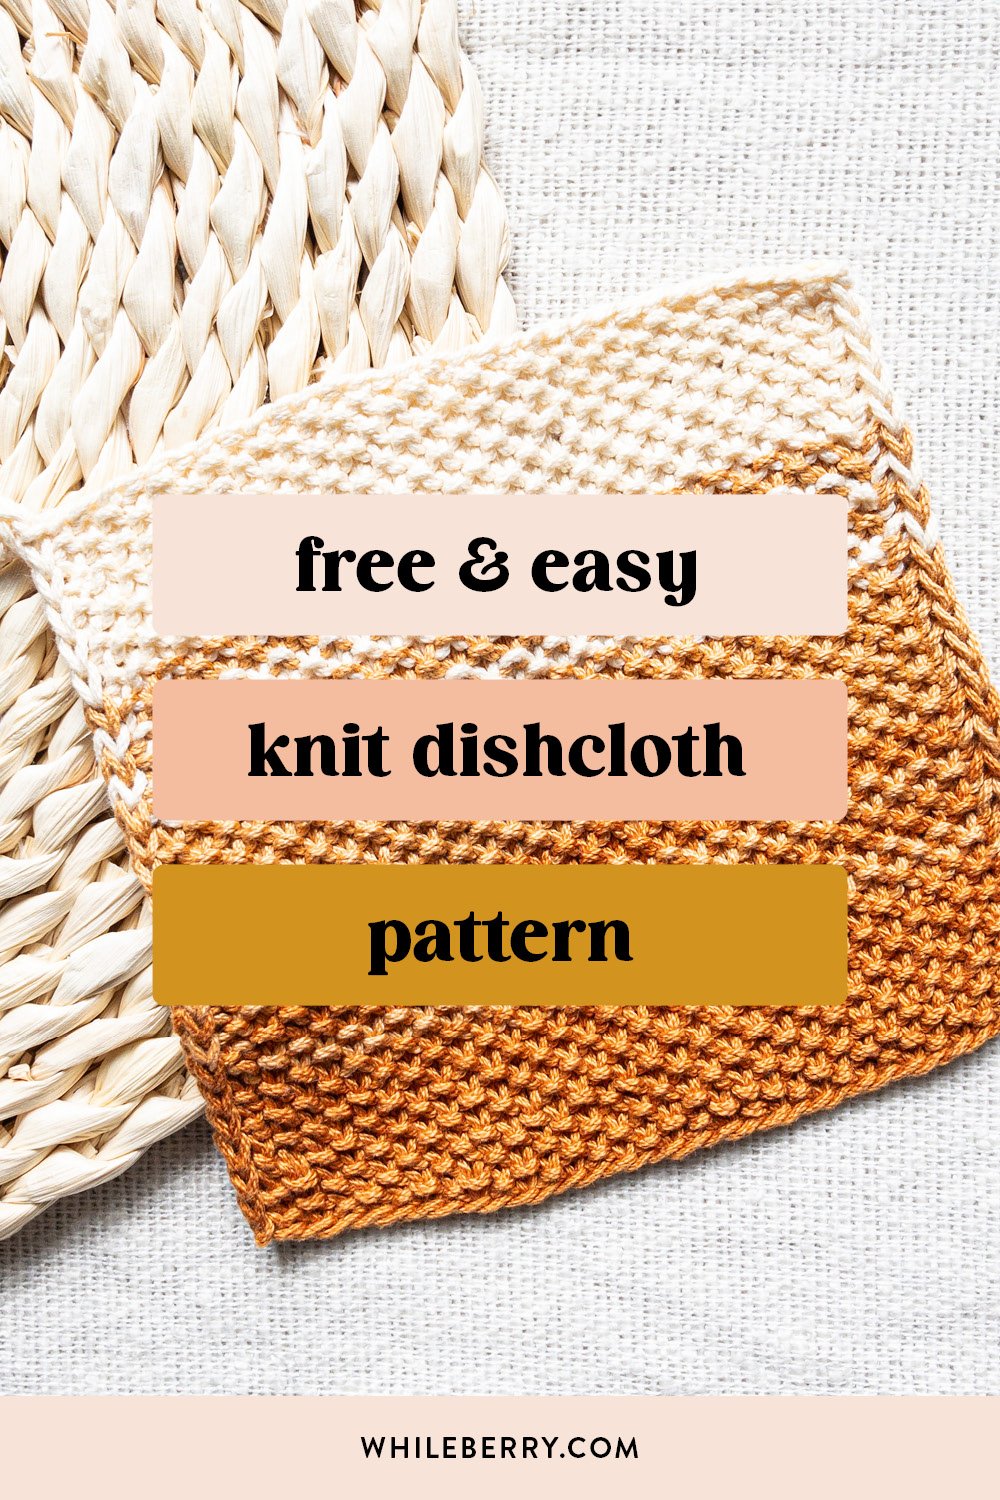 How to Knit a Dishcloth – Easy Knitting for Beginners